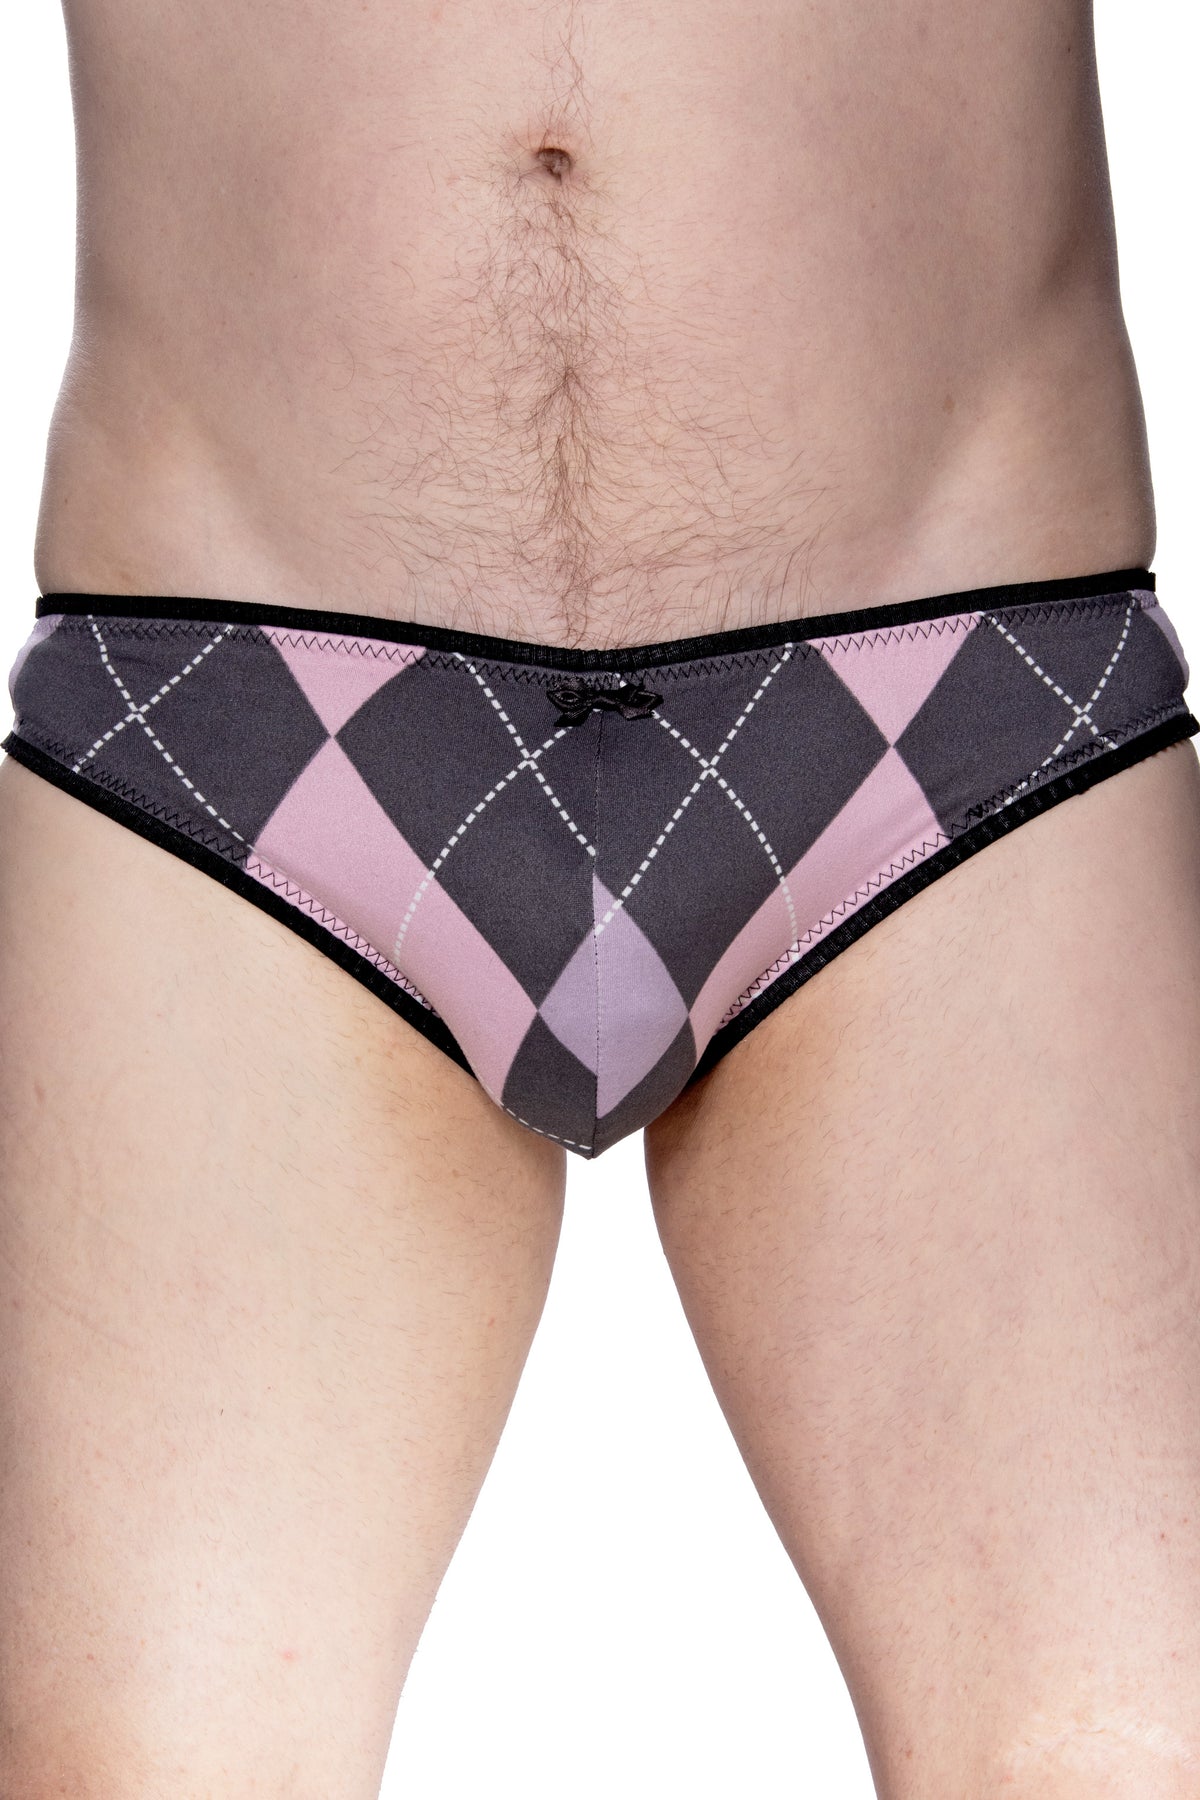 Harlequin and diamond back Brief Ultra soft rayon blend Harlequin plaid mens brief features a soft cotton liner , four way stretch high quality rose lace back, and gorgeous pleated stretch line leg and waist elastic. Quality tested for all day everyday comfort and wear.